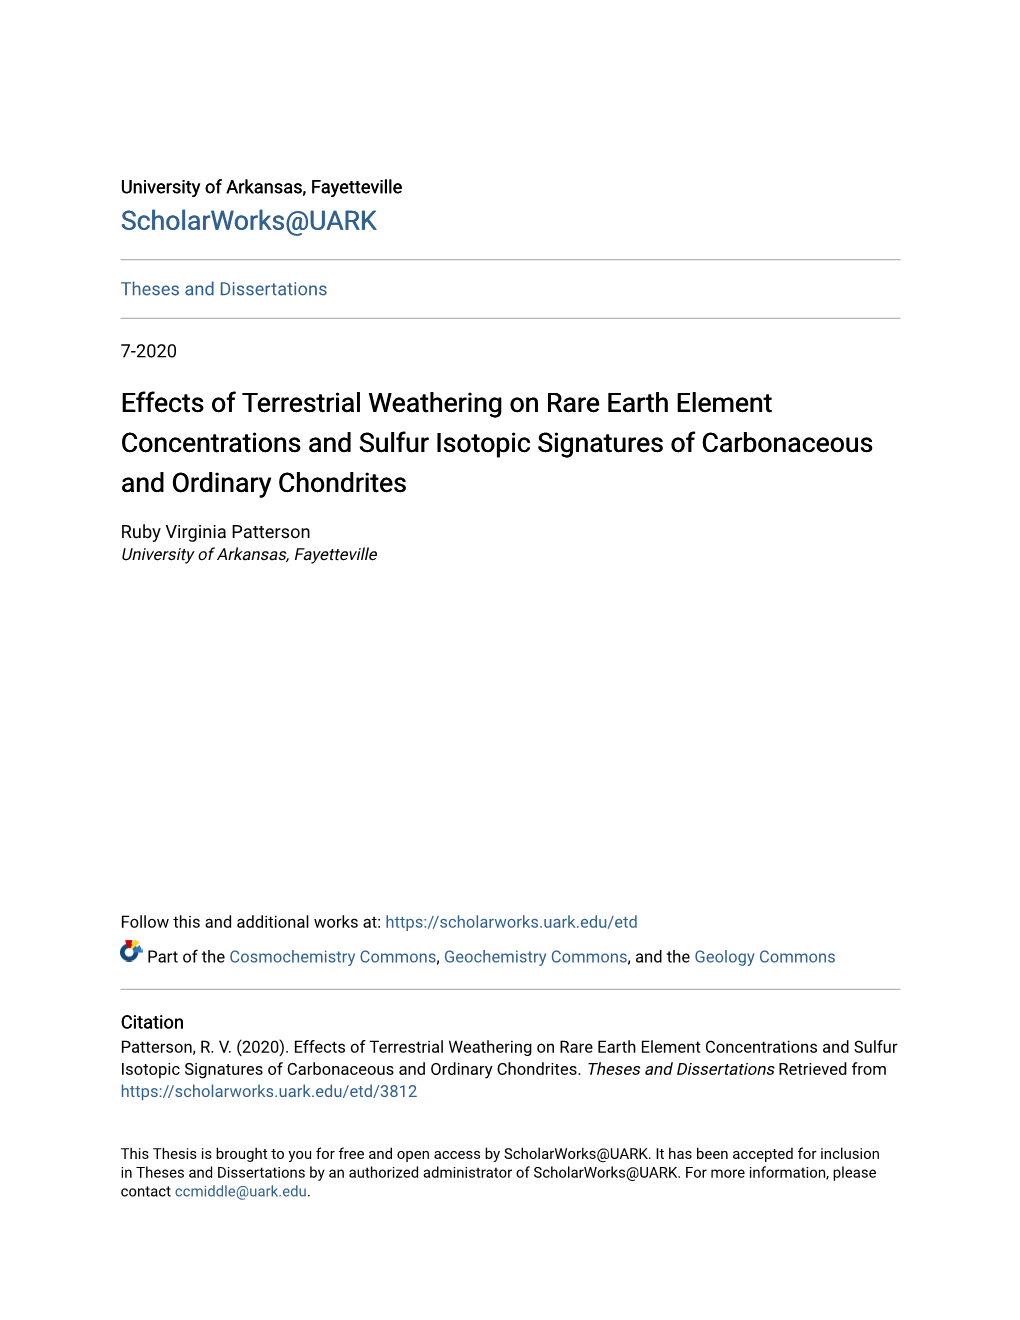 Effects of Terrestrial Weathering on Rare Earth Element Concentrations and Sulfur Isotopic Signatures of Carbonaceous and Ordinary Chondrites